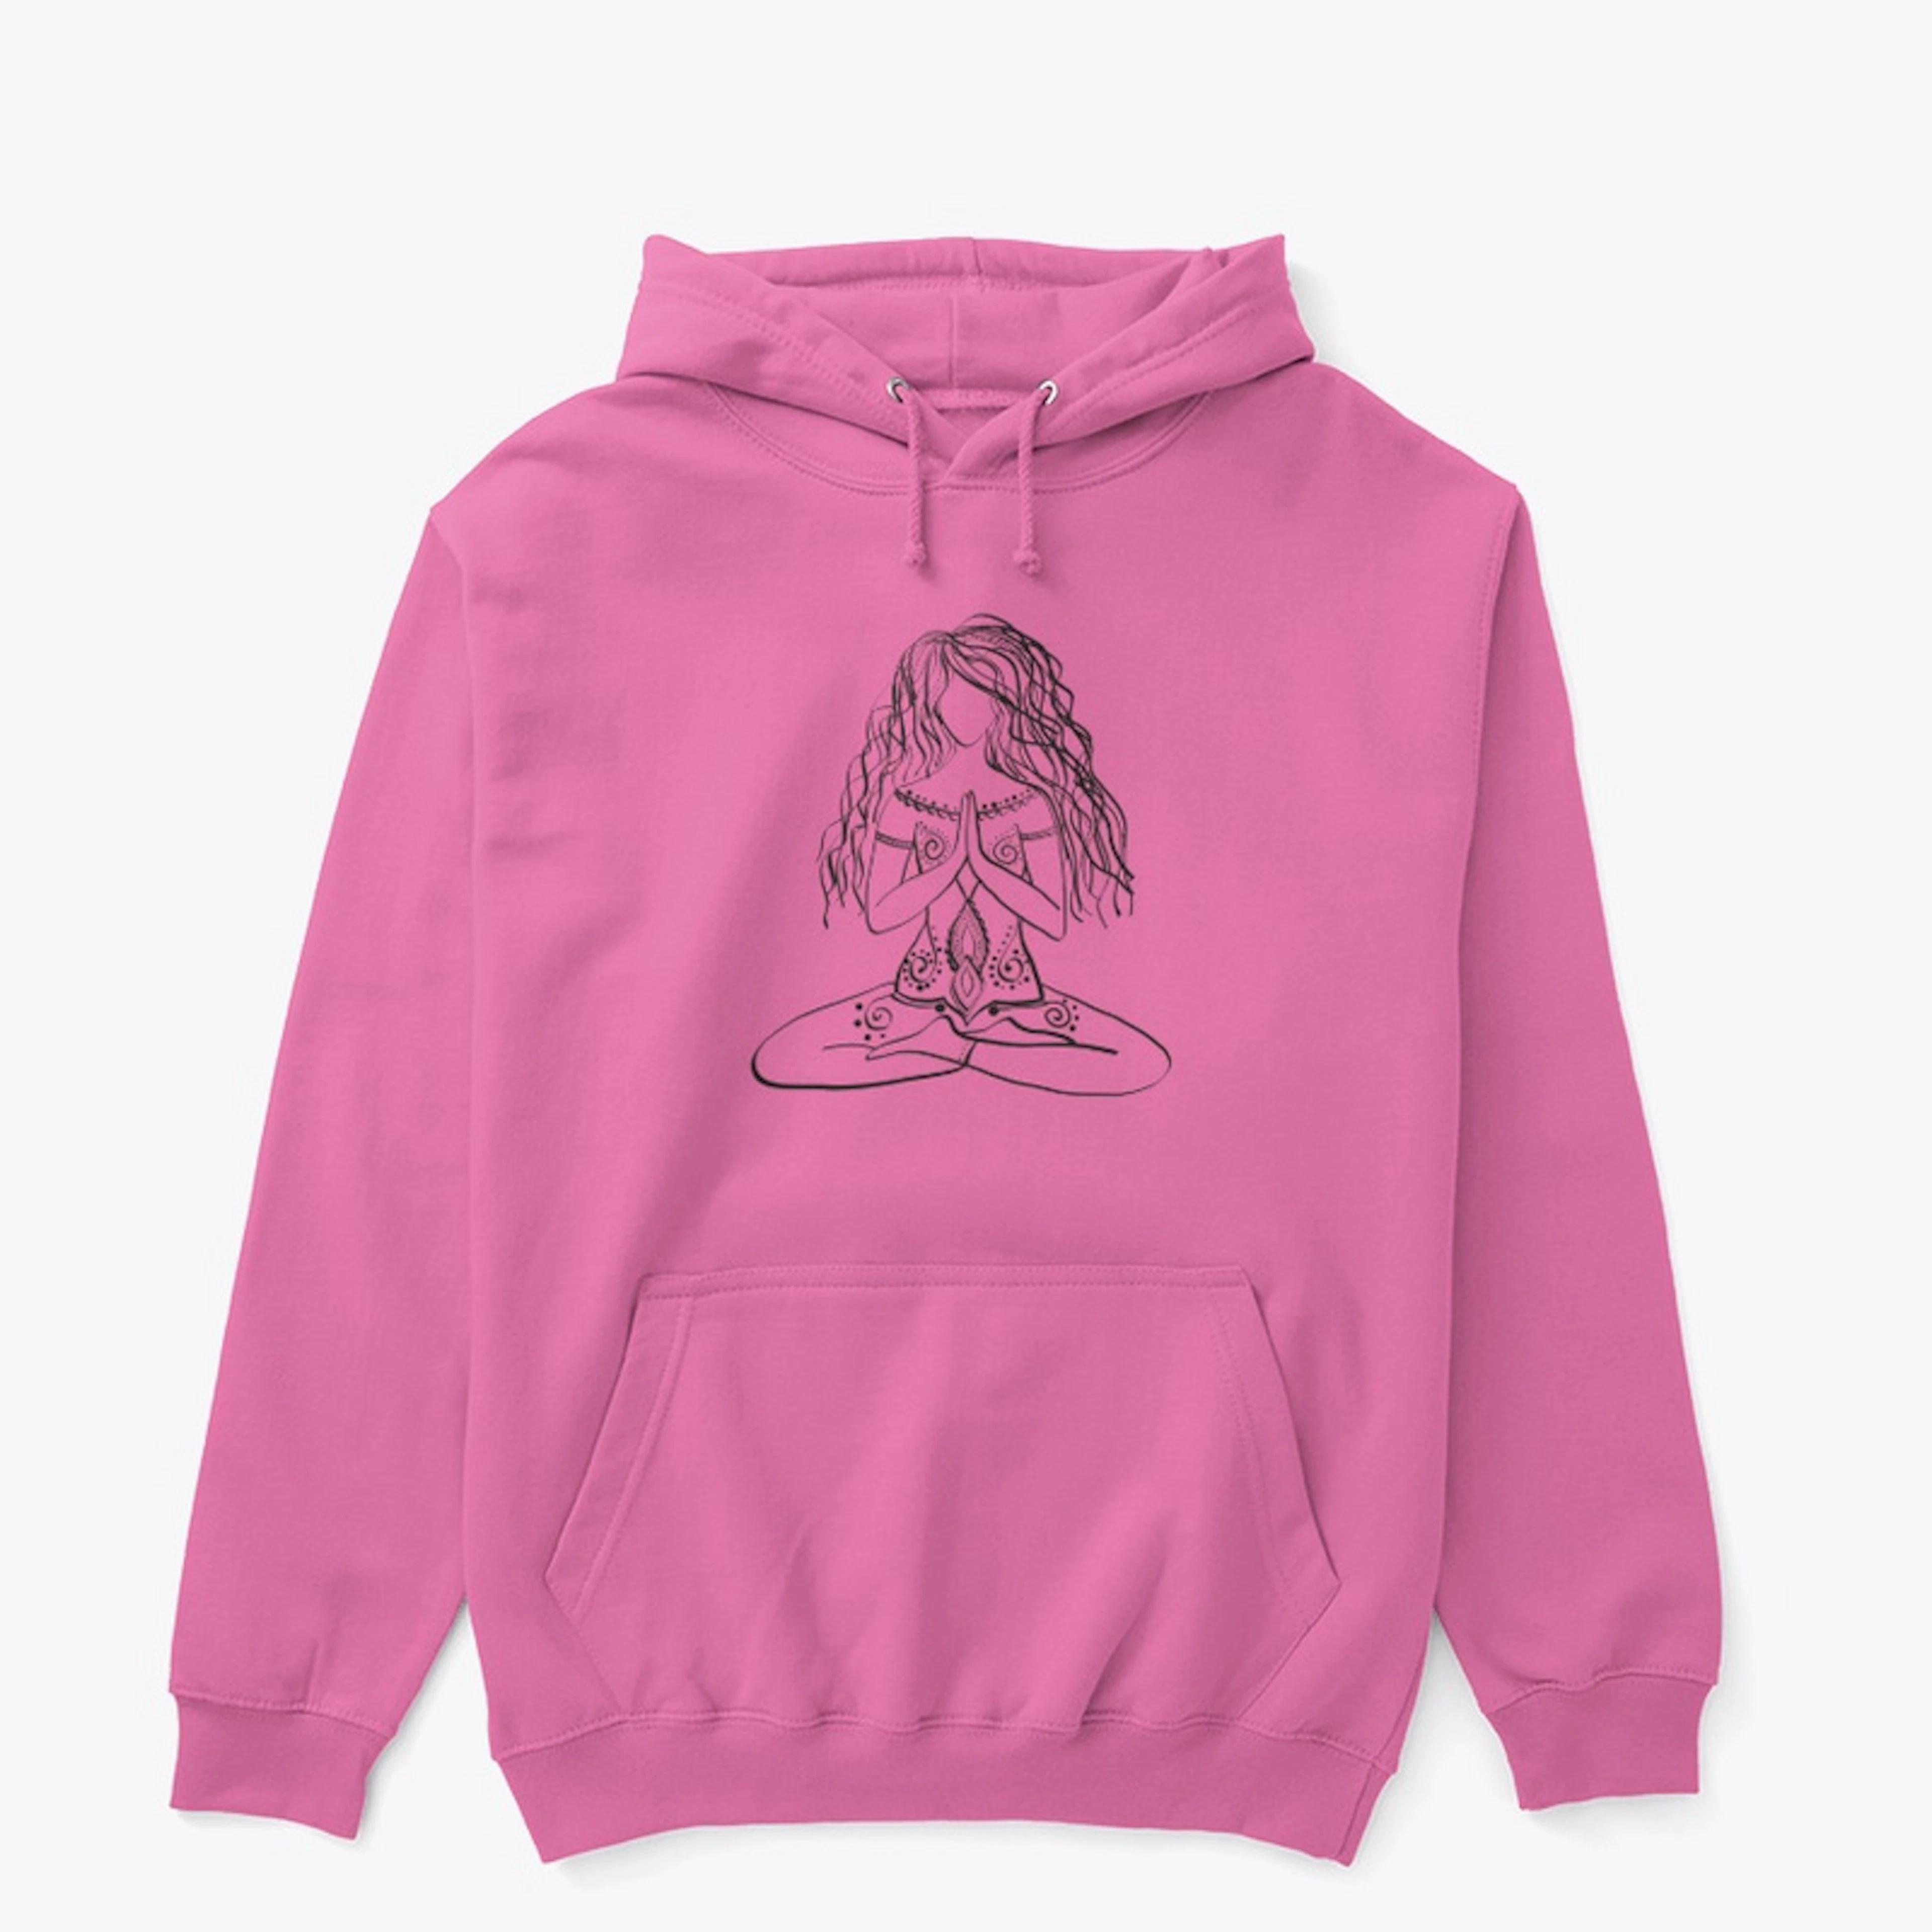 Serenity Hoodies - Limited Edition